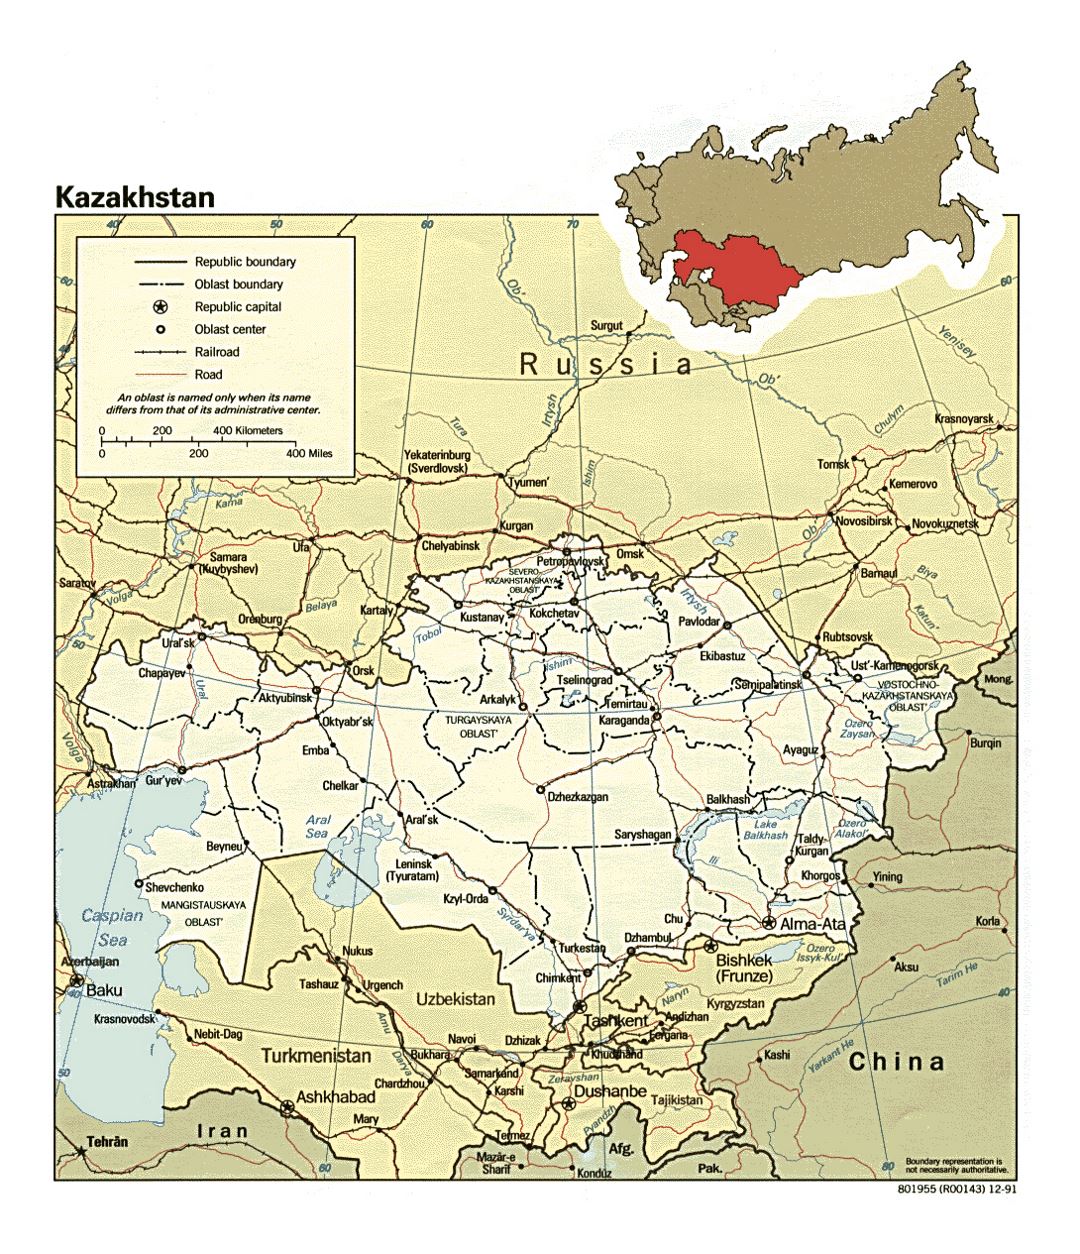 Detailed political and administrative map of Kazakhstan with roads, railroads and cities - 1991